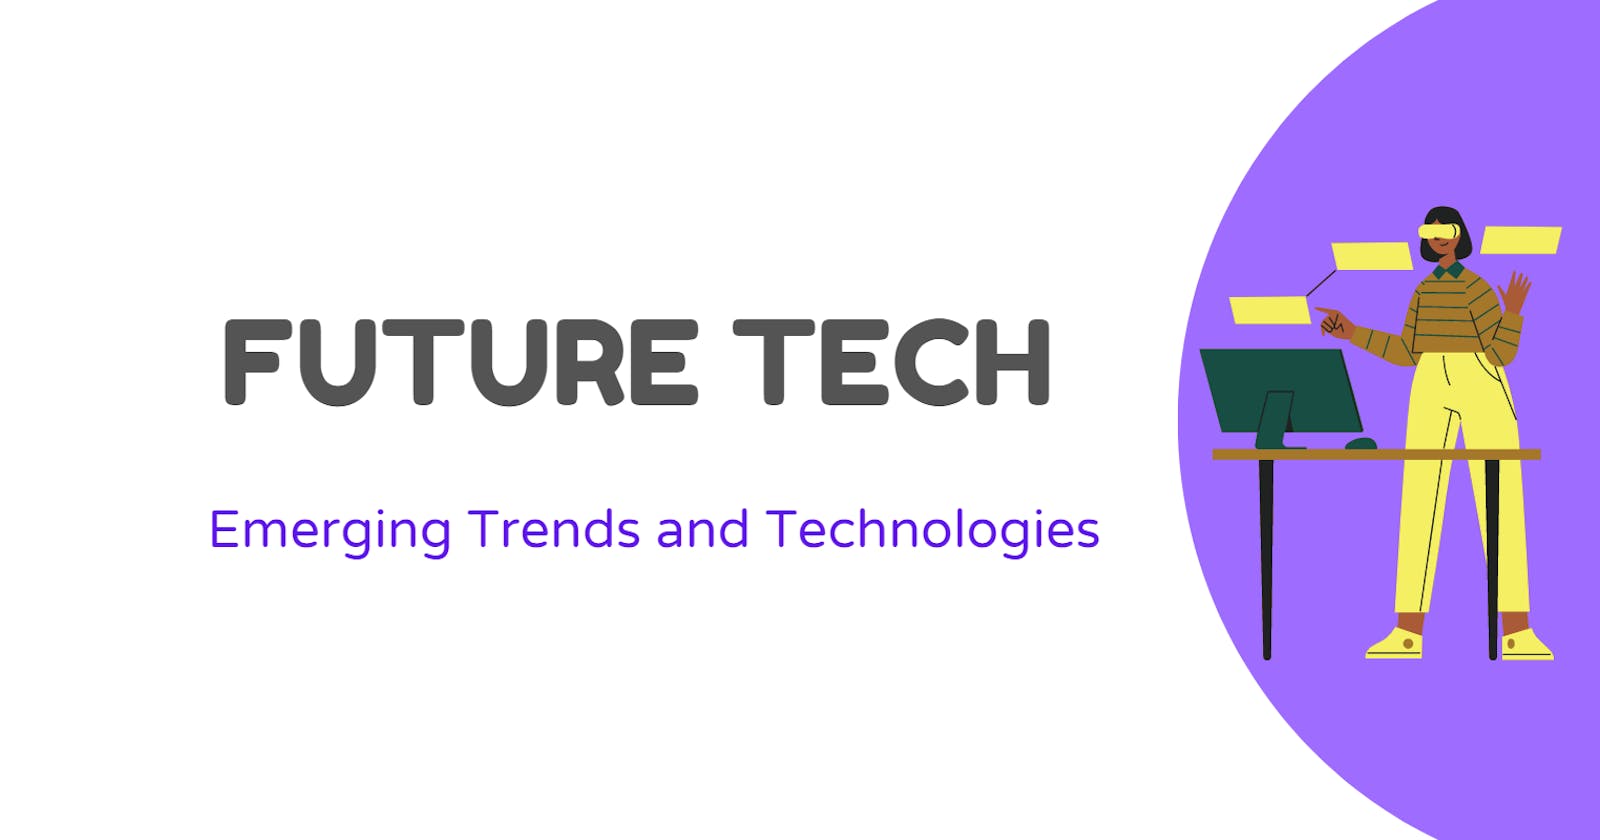 Future Tech: Emerging Trends and Technologies